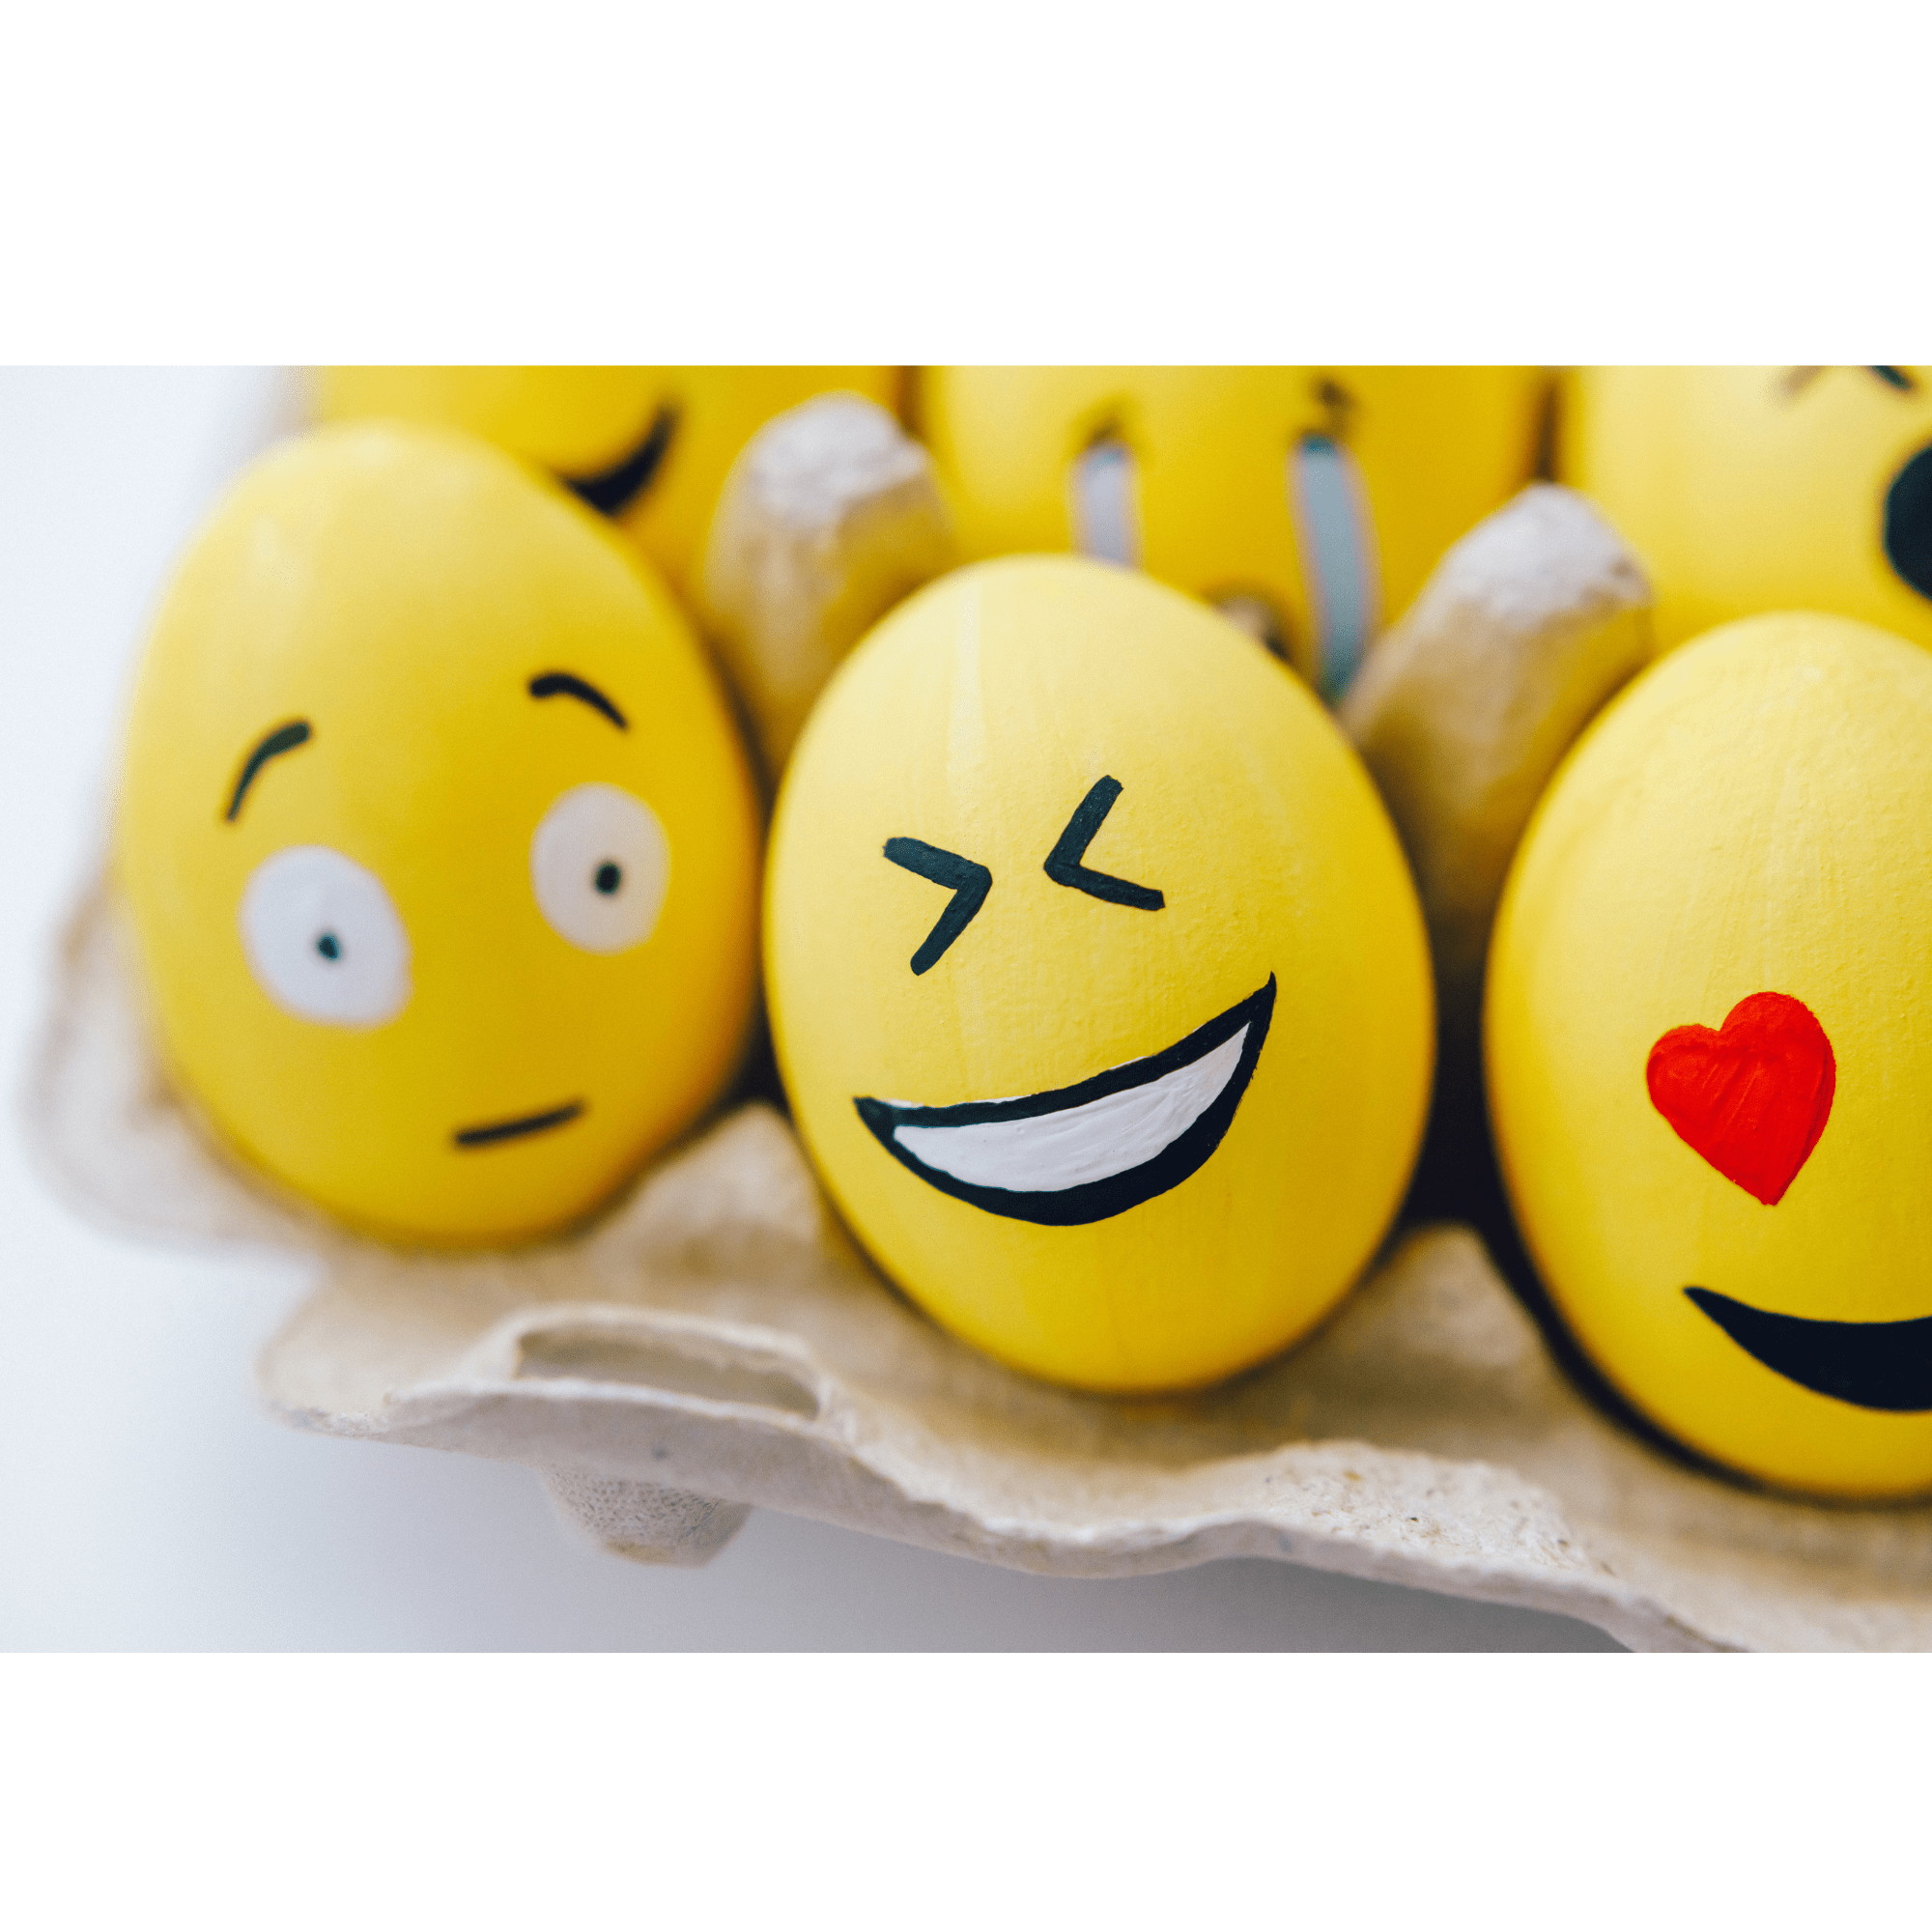 The Value of Emojis in Marketing